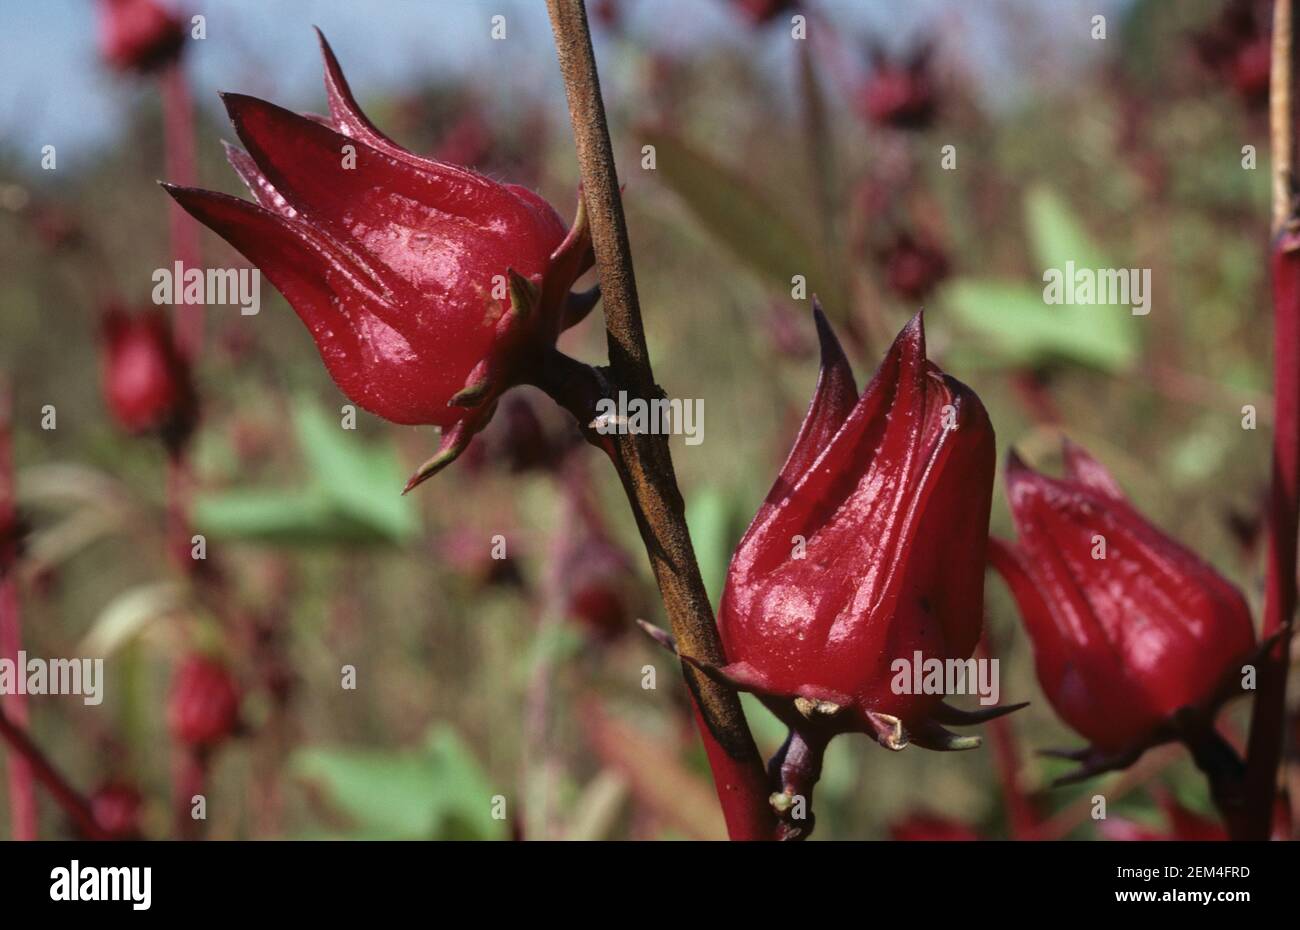 Red okra or roselle (Hibiscus sabdariffa) fruit crop on the bush used in medicine, confectionery and tea making, Thailand Stock Photo